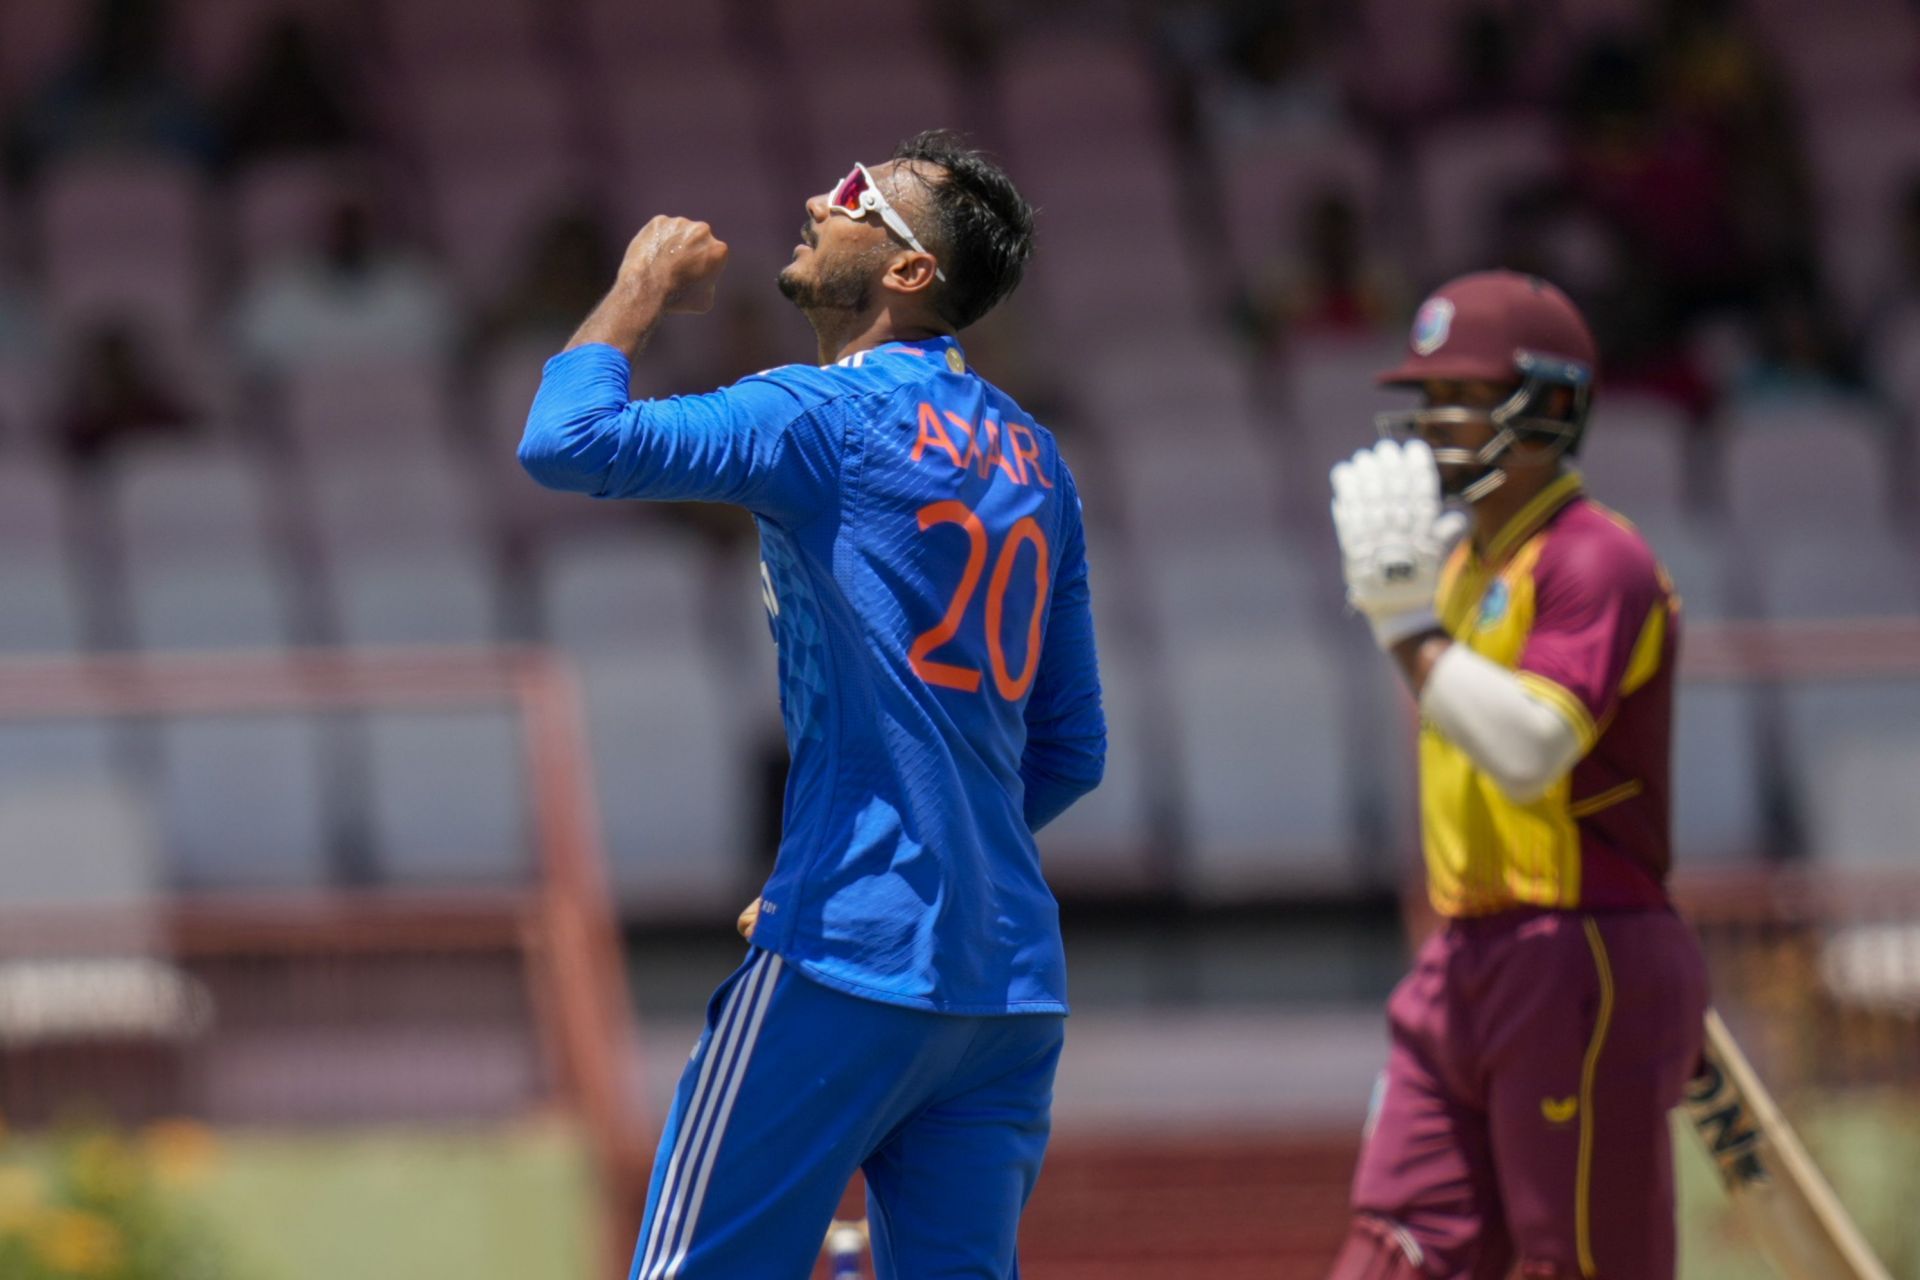 Axar Patel bowled three overs in the powerplay